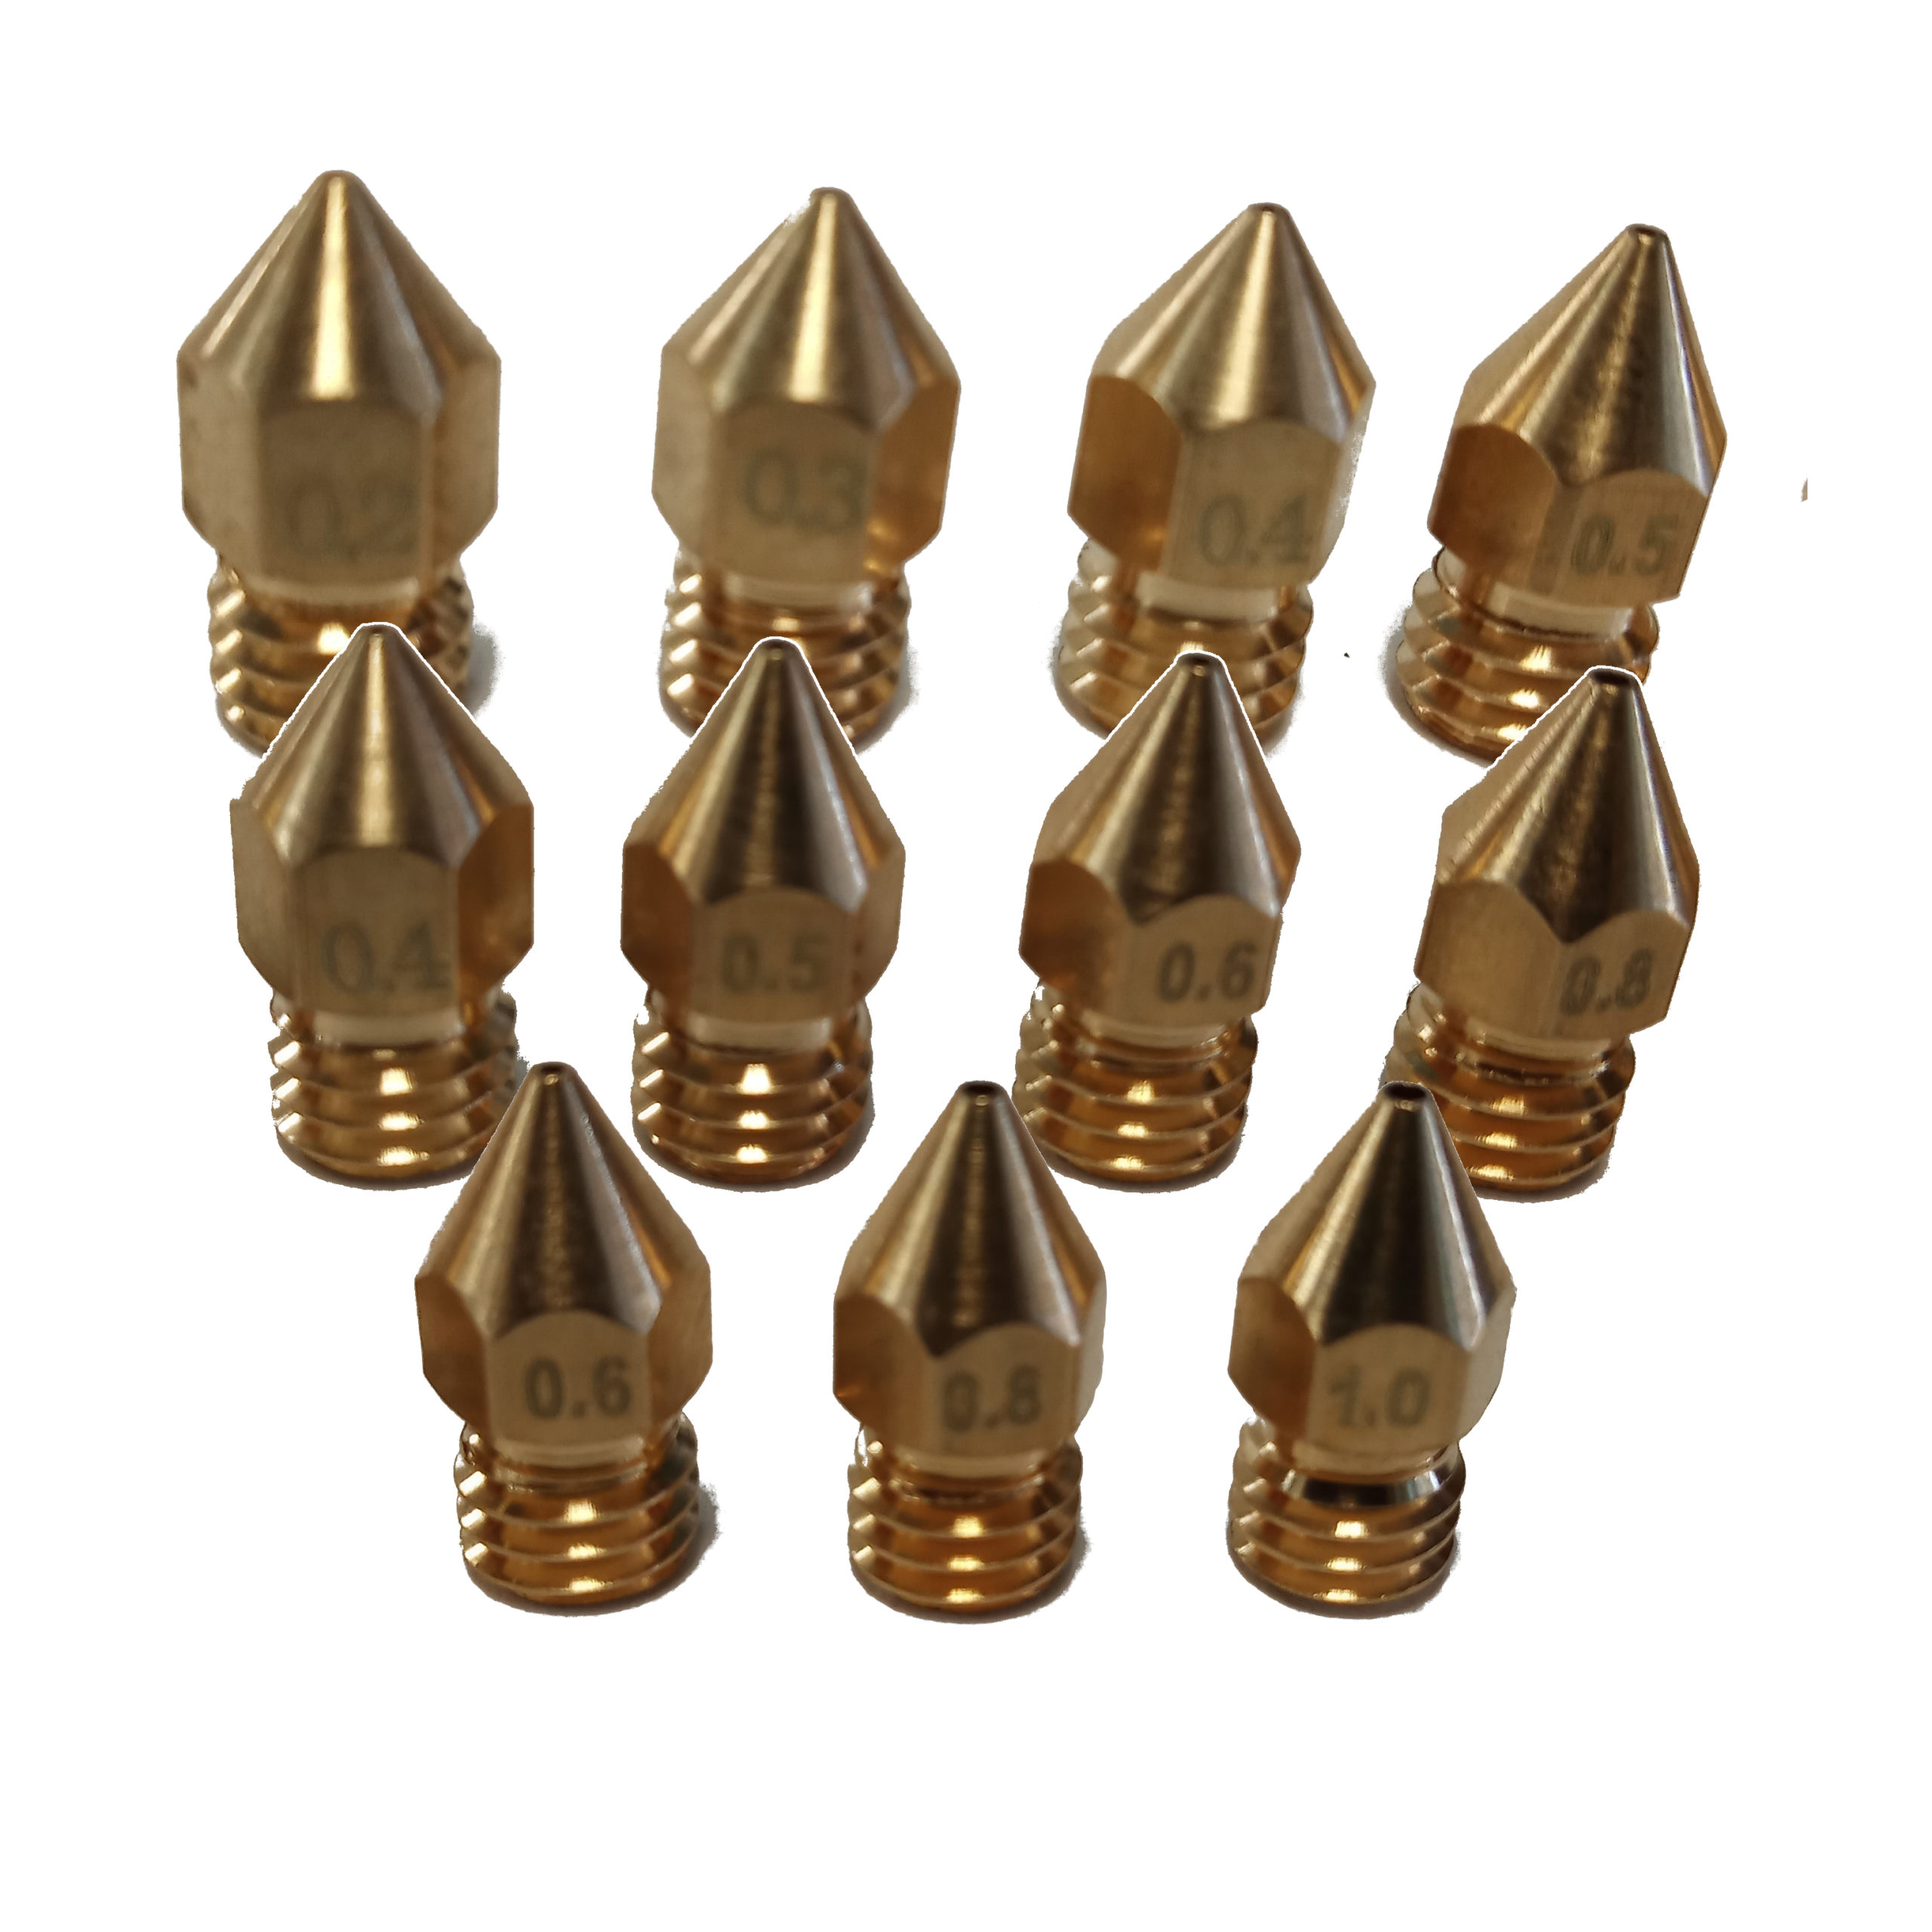 Single MK8 Nozzle 0.2mm to 1.0 mm (Brass)